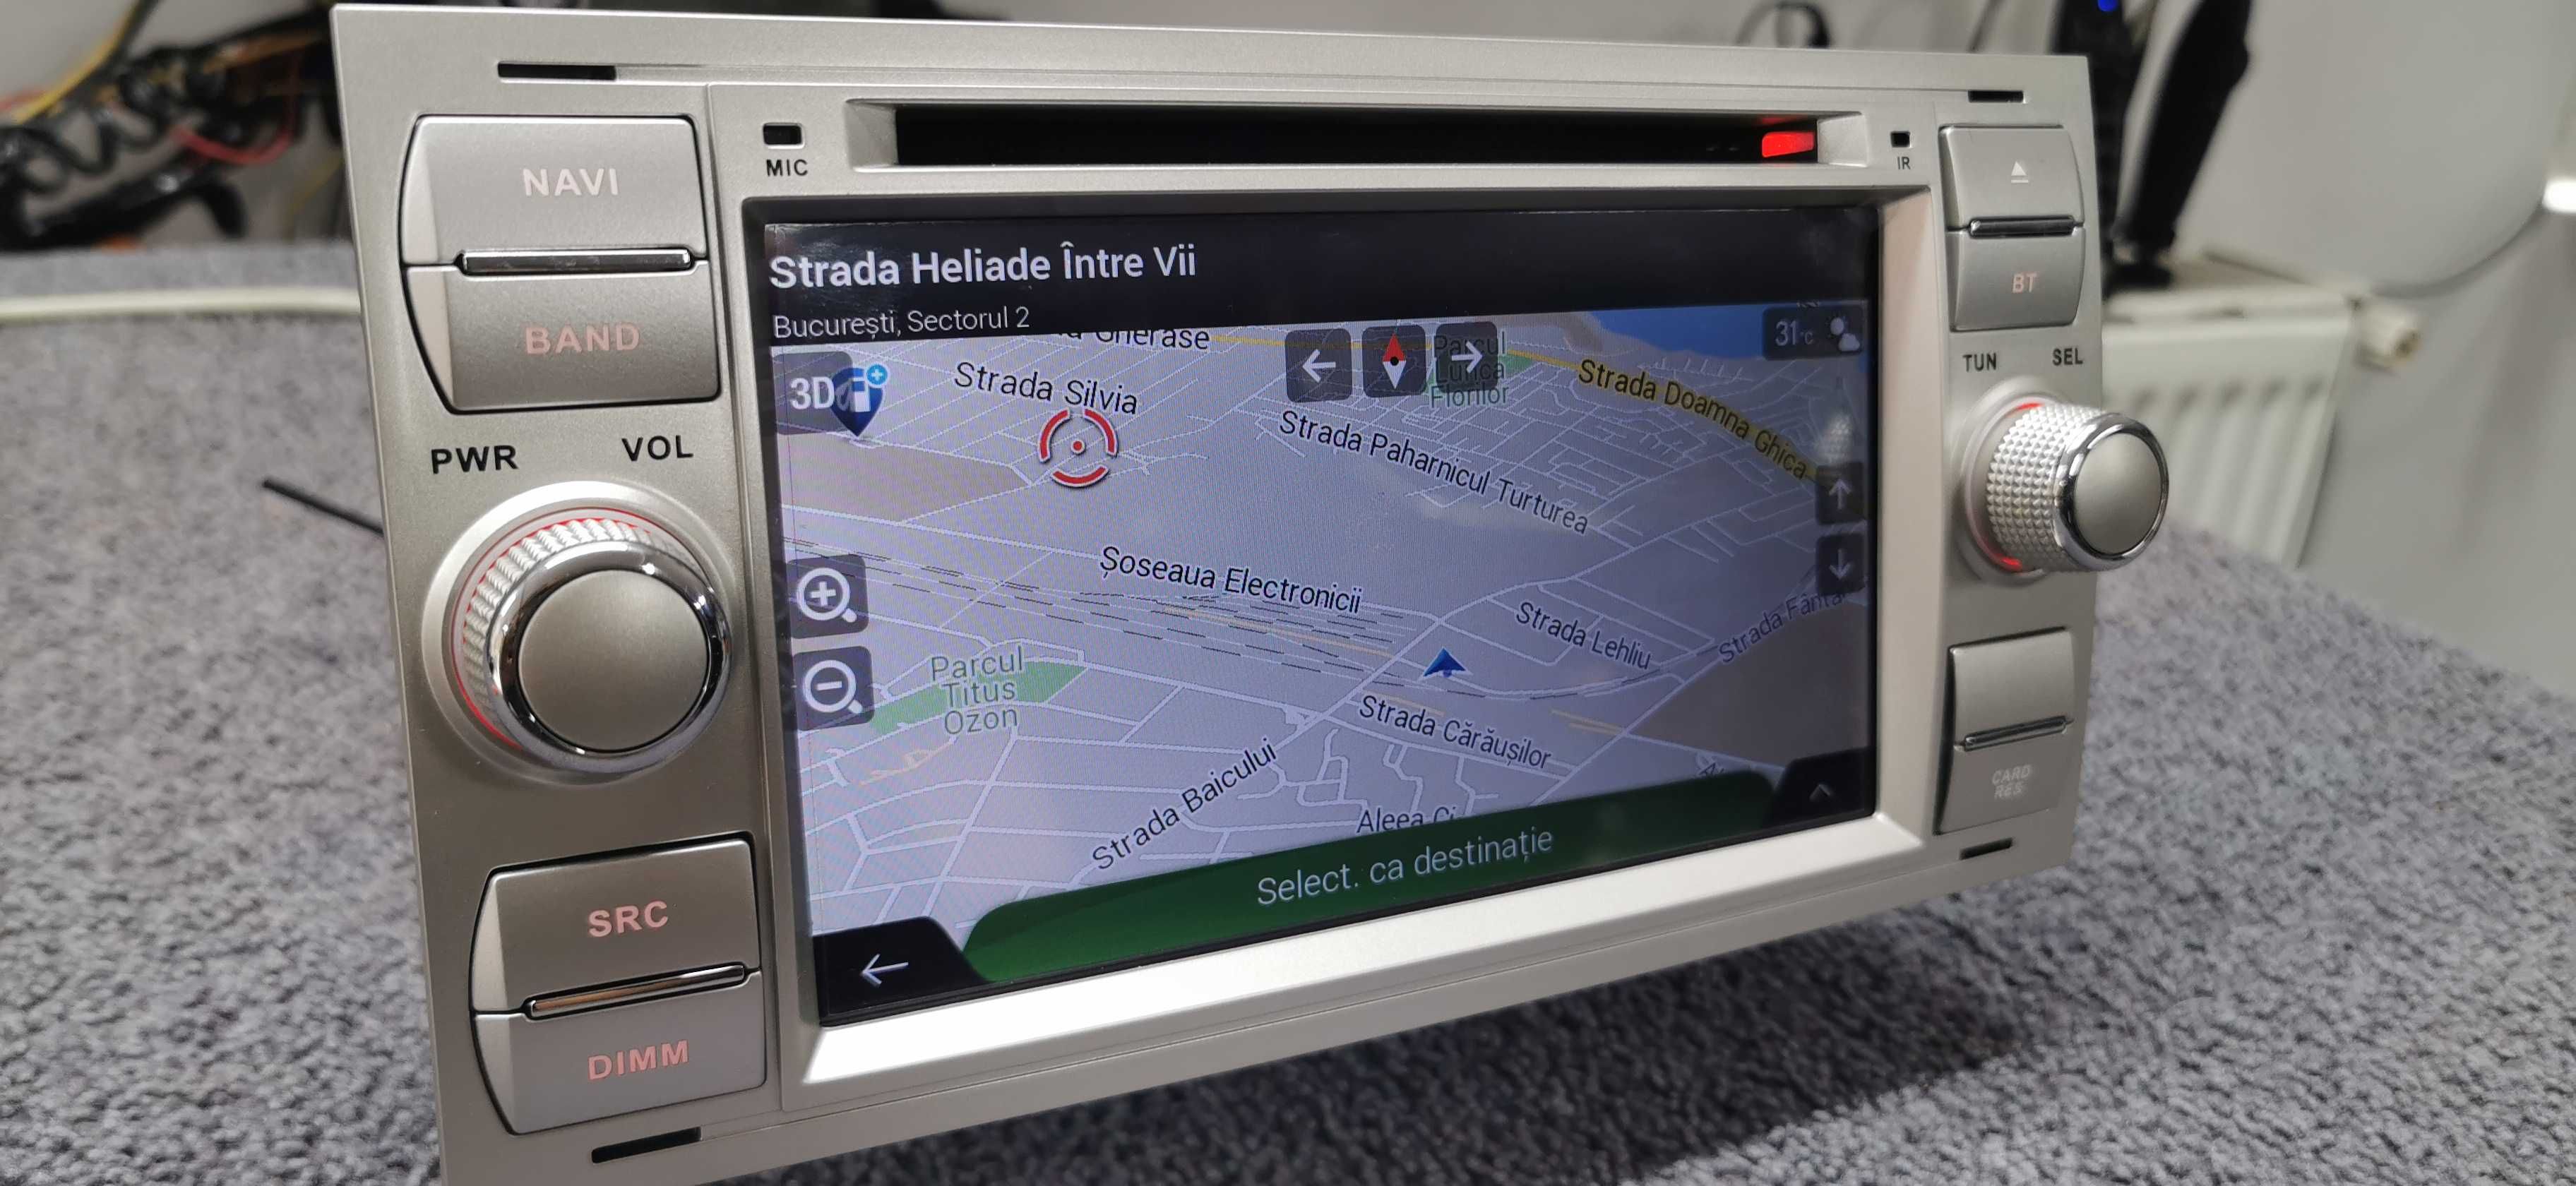 Navigatie Ford Kuga ANDROID  OCTACORE 32GB/4GB RAM